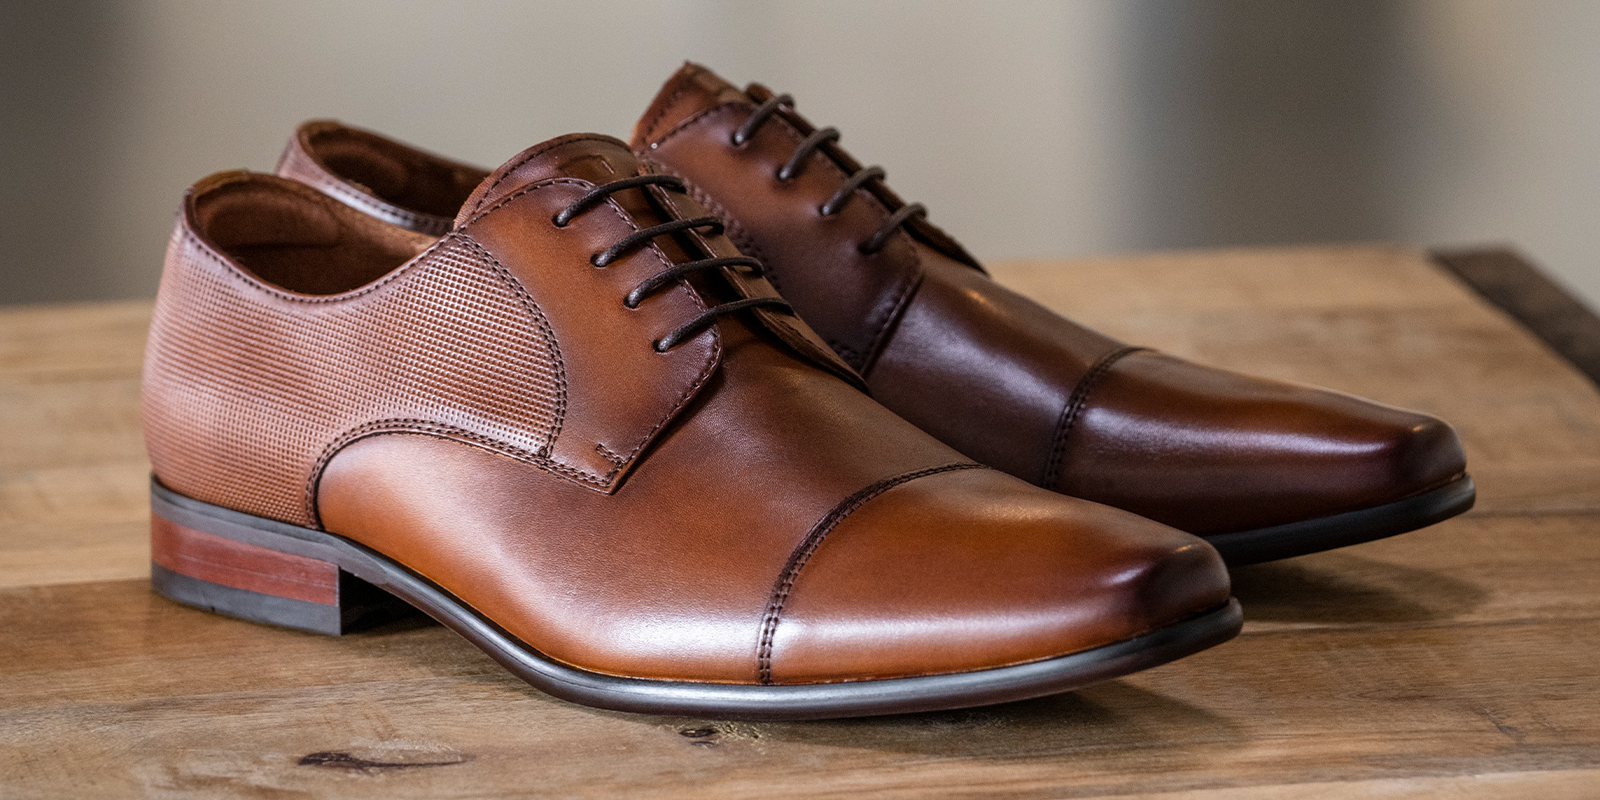 The featured image is the Postino Cap Toe Oxford in Cognac.